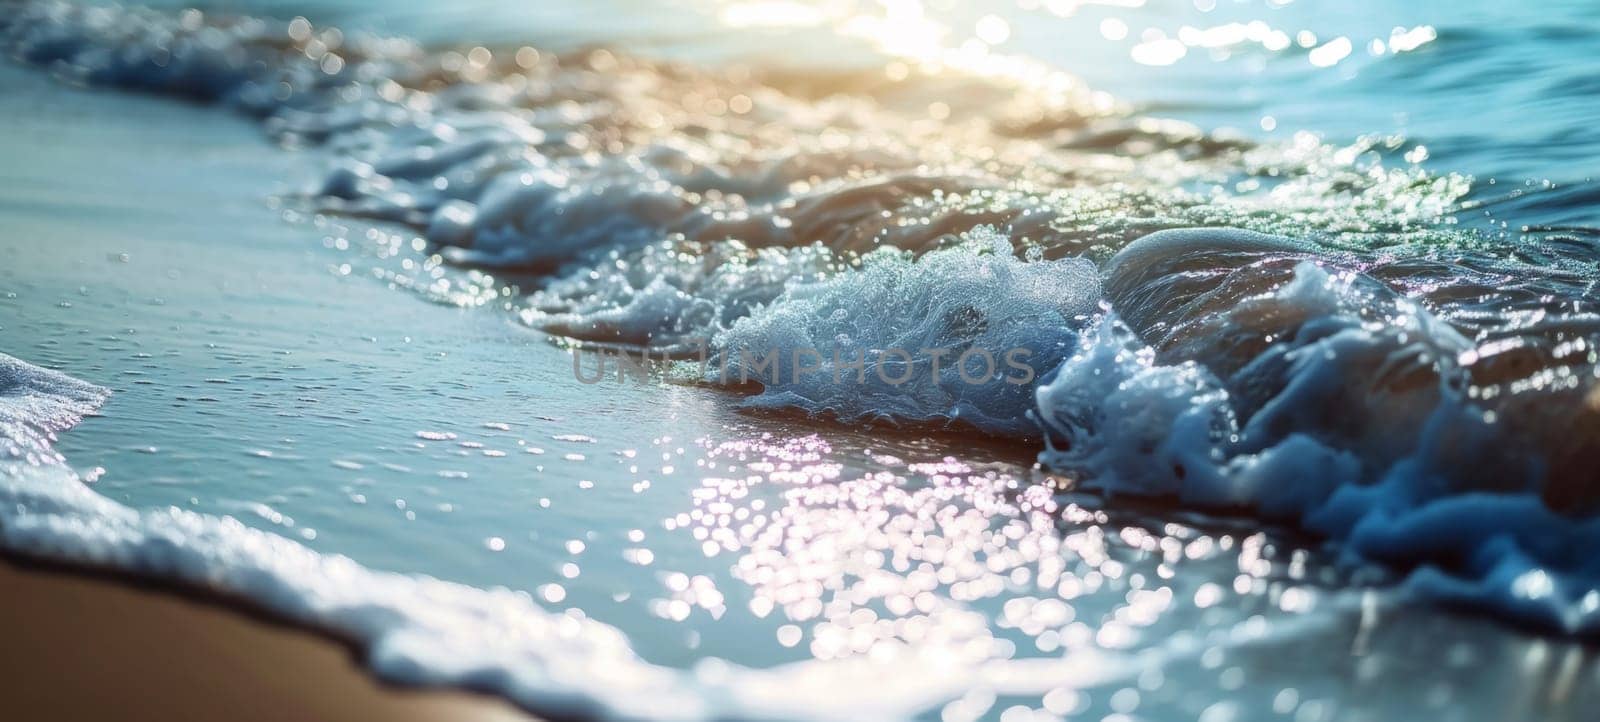 A serene seascape captures the gentle caress of waves on sunlit beach sand, a moment of calm embodied in nature's soft touch